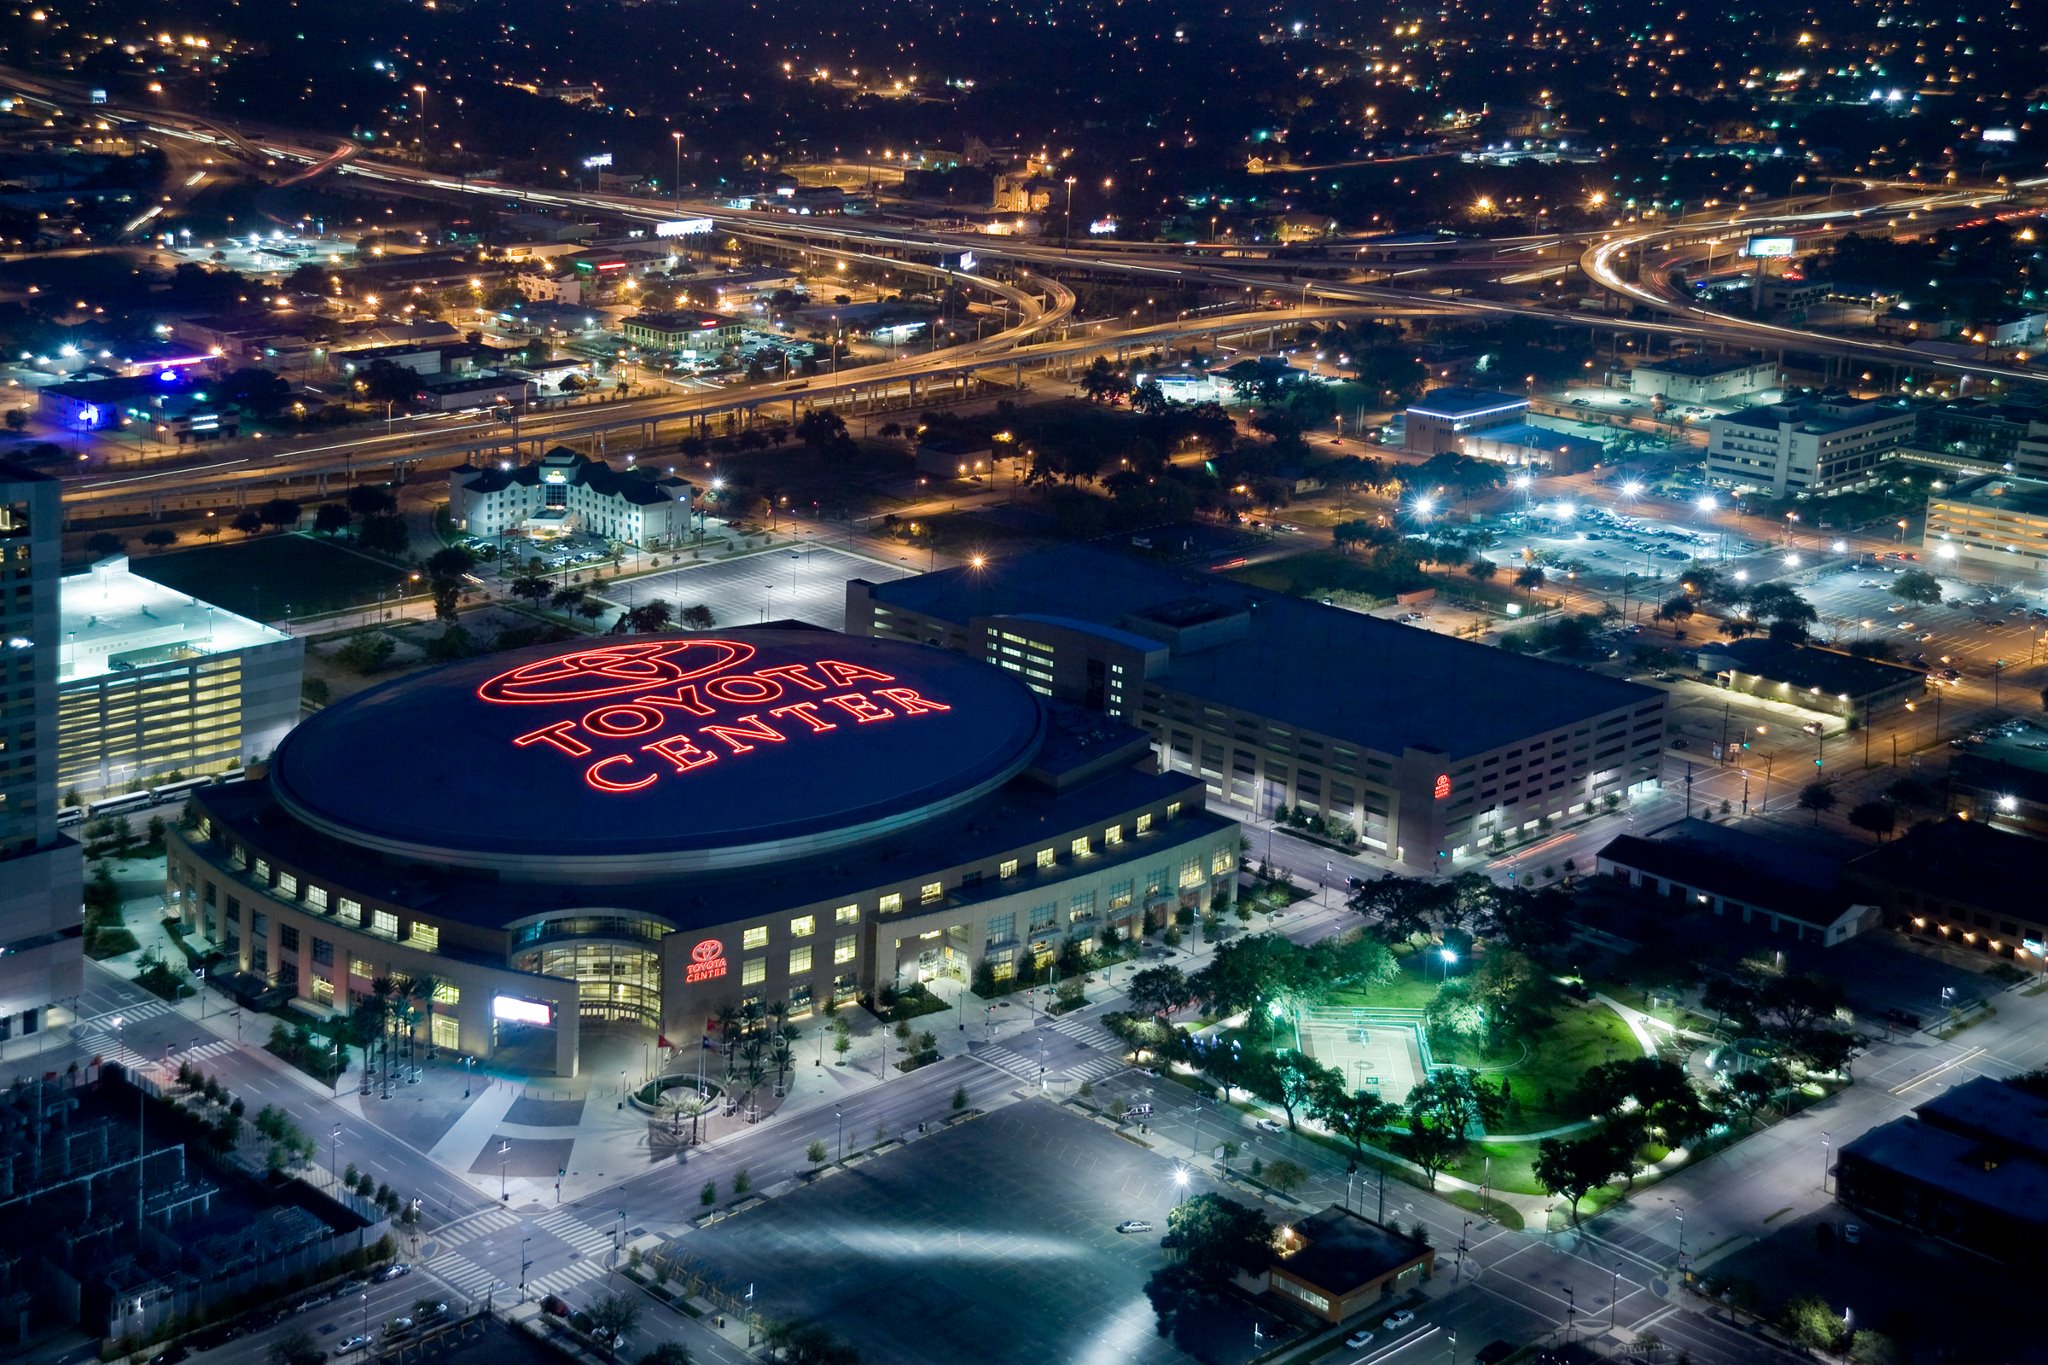 Houston Toyota Center Events Calendar and Tickets